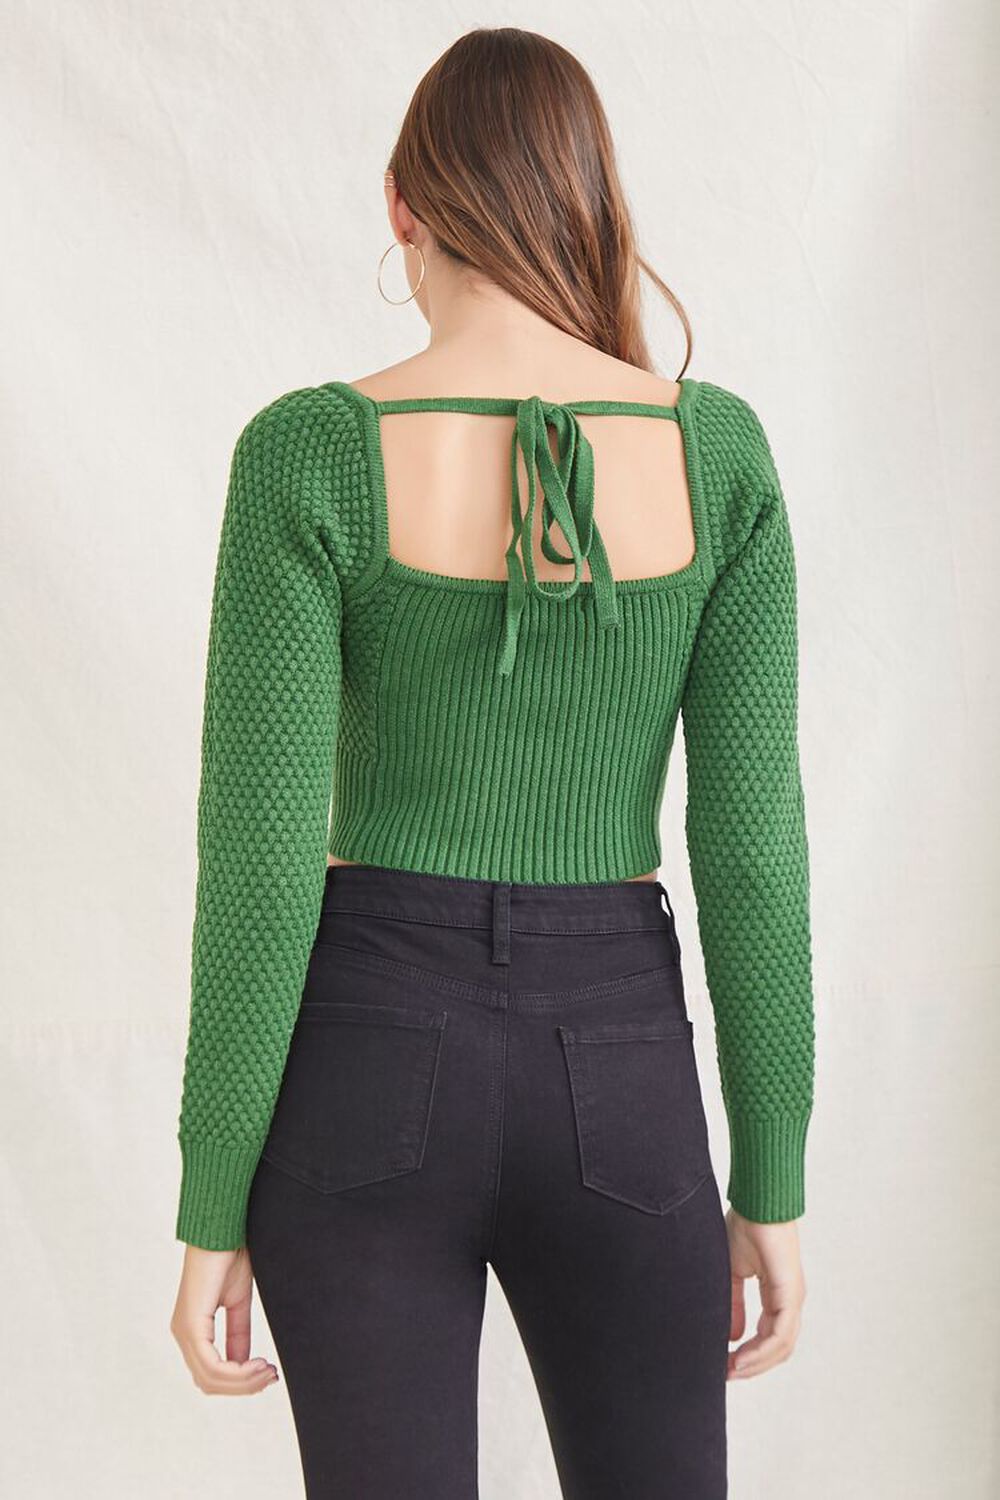 GREEN Popcorn Knit Cropped Sweater, image 3